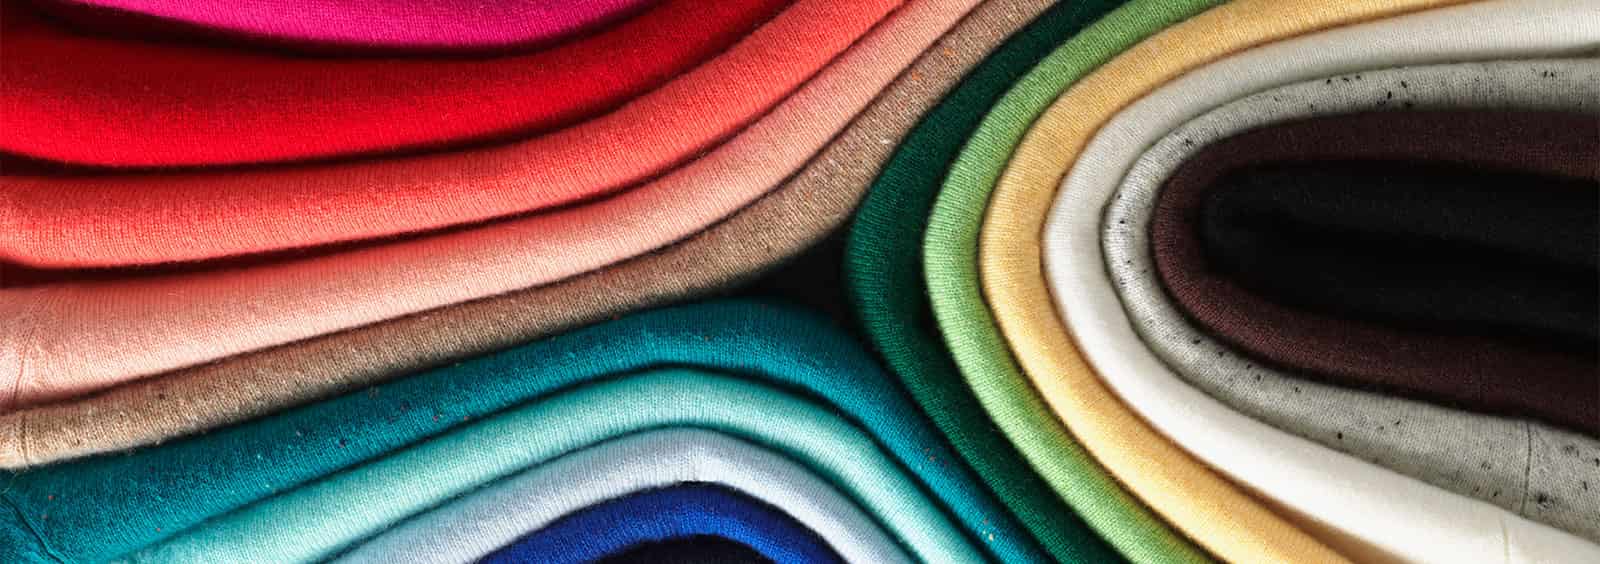 Cashmere Sweaters That Can Spruce Up Any Outfit